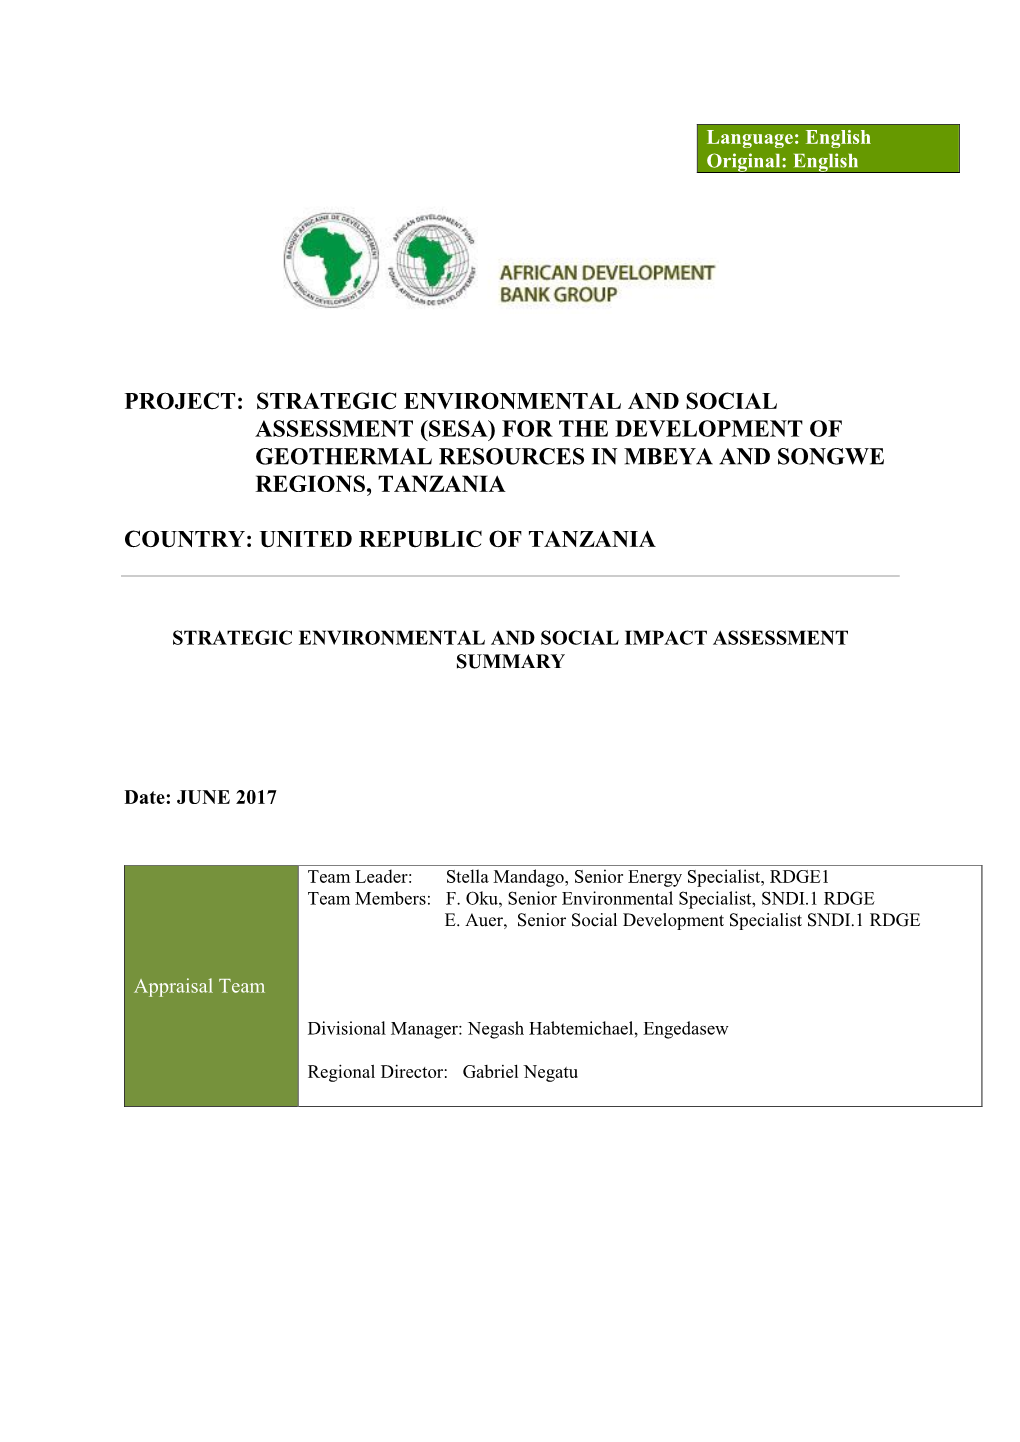 Project: Strategic Environmental and Social Assessment (Sesa) for the Development of Geothermal Resources in Mbeya and Songwe Regions, Tanzania